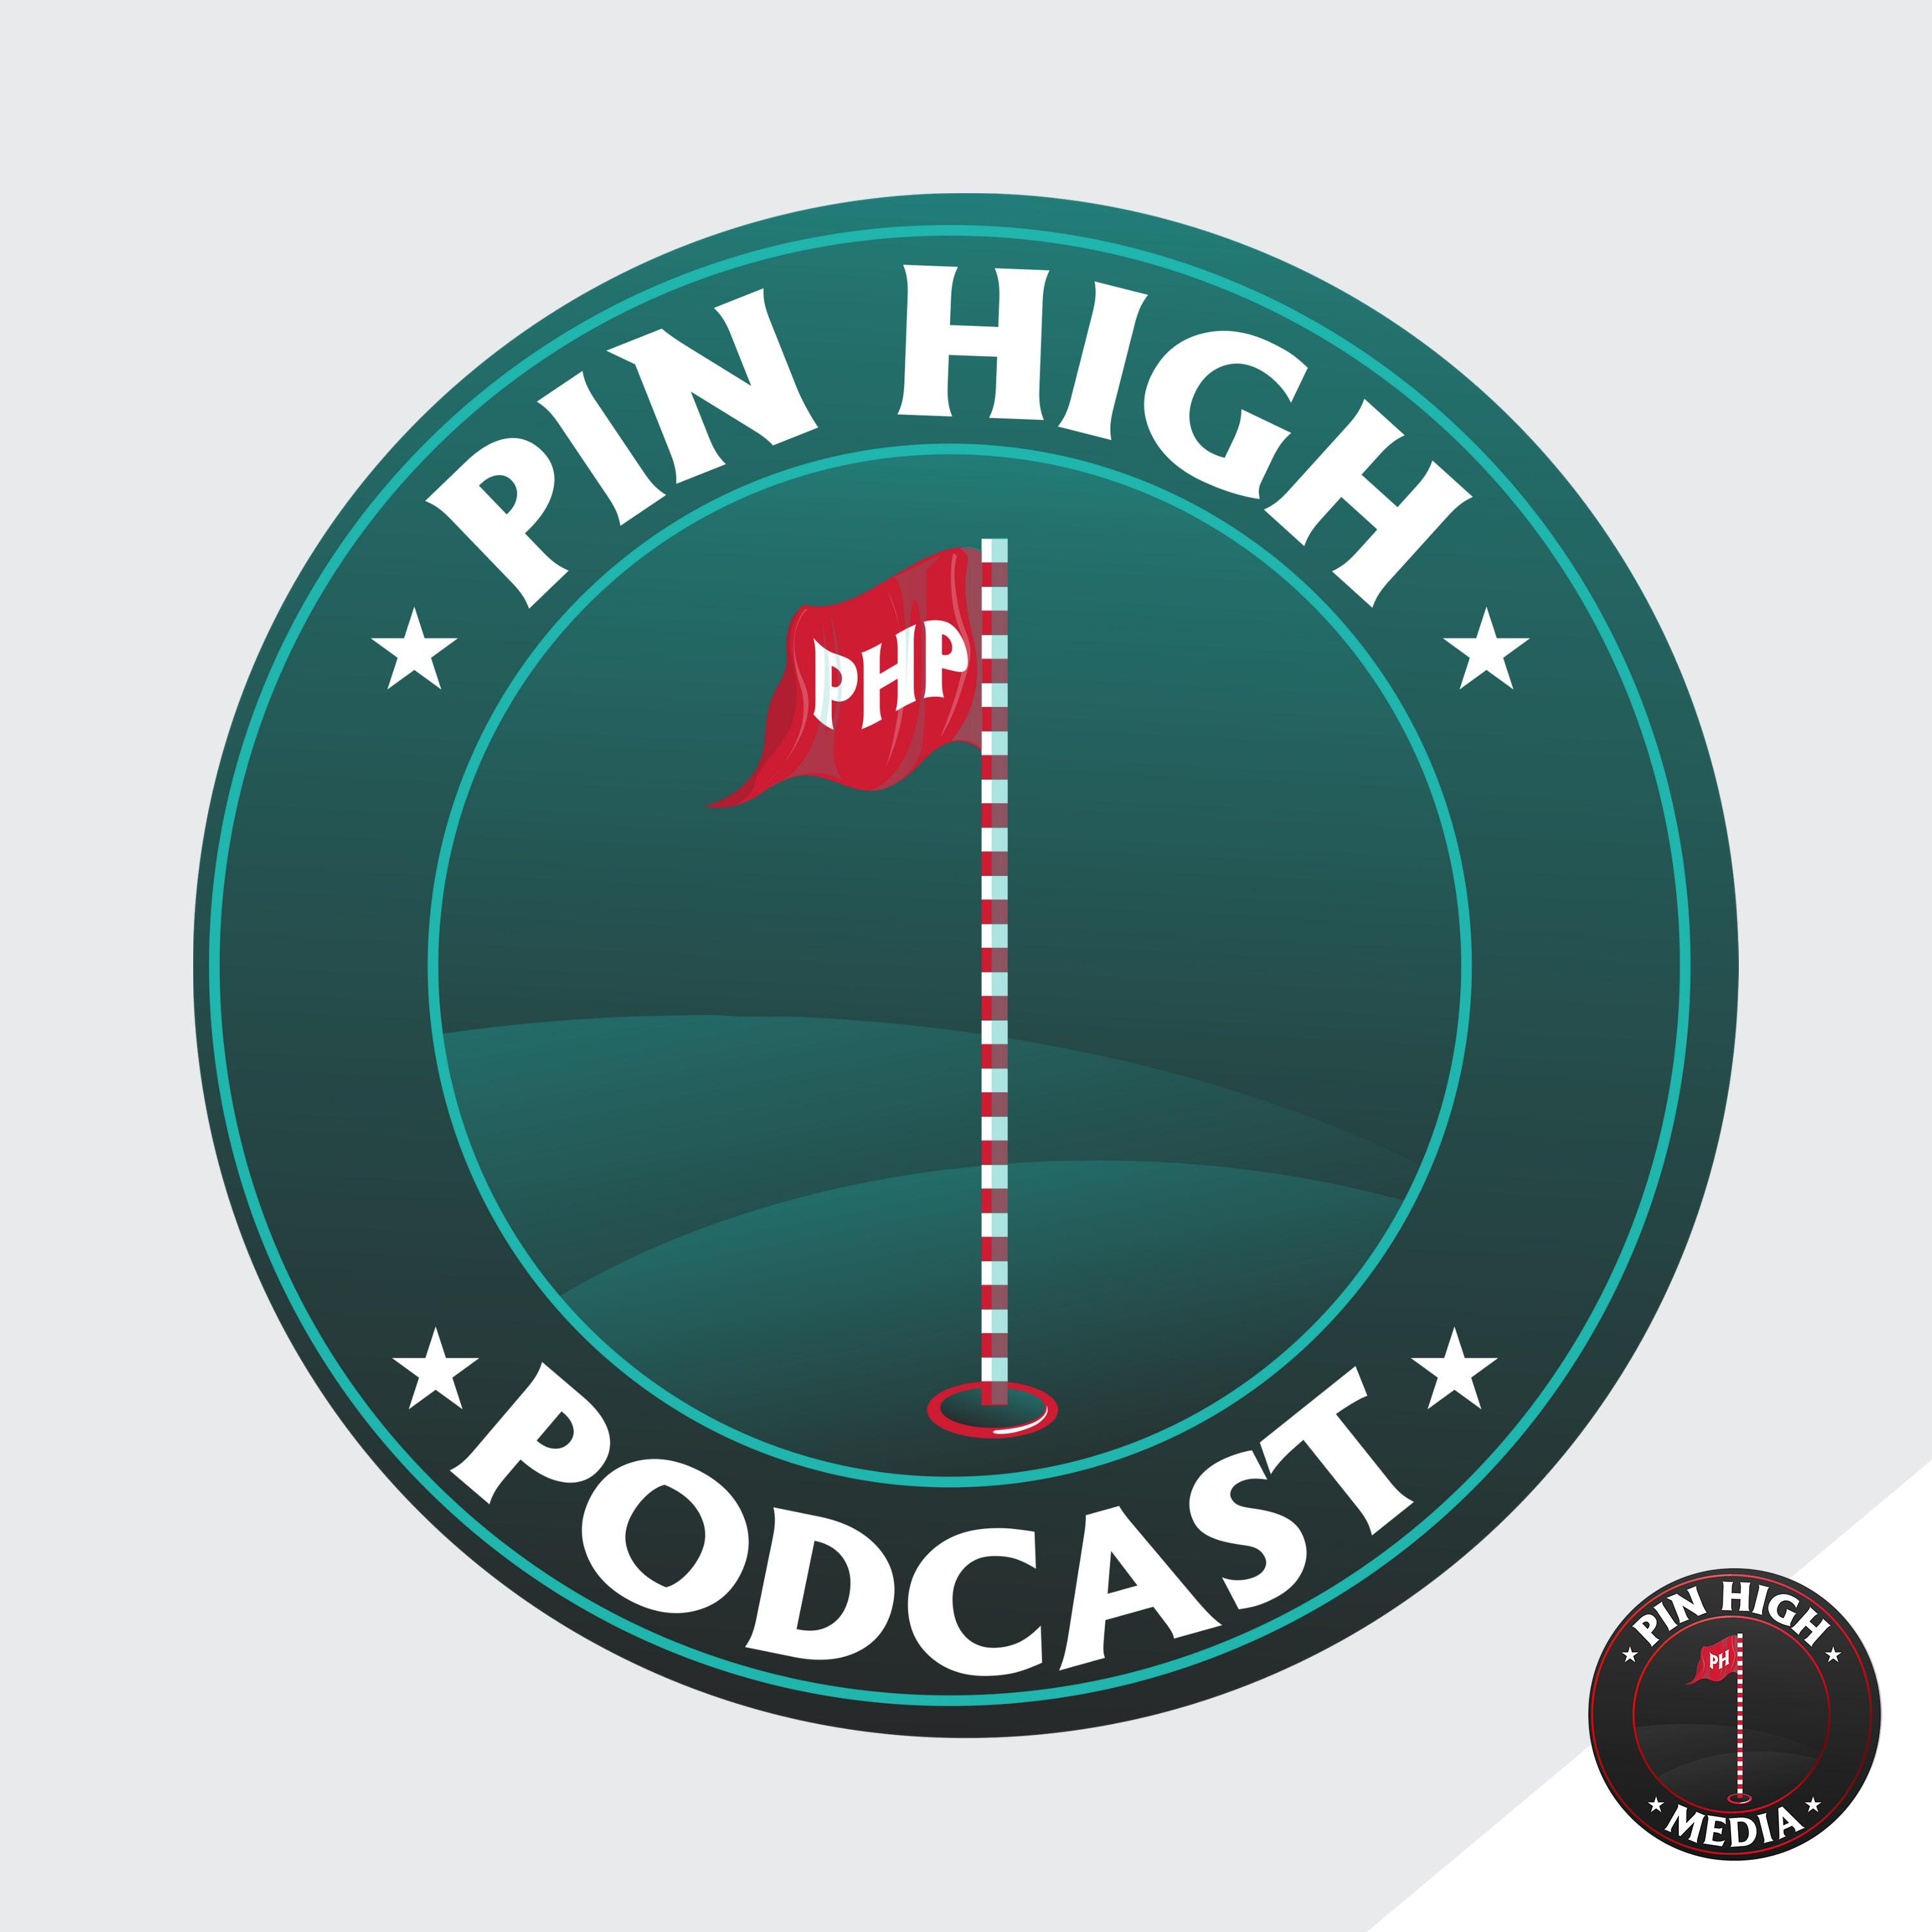 Pin High Podcast Ep. 185: Will Rory McIlroy Ever Win Another Major?